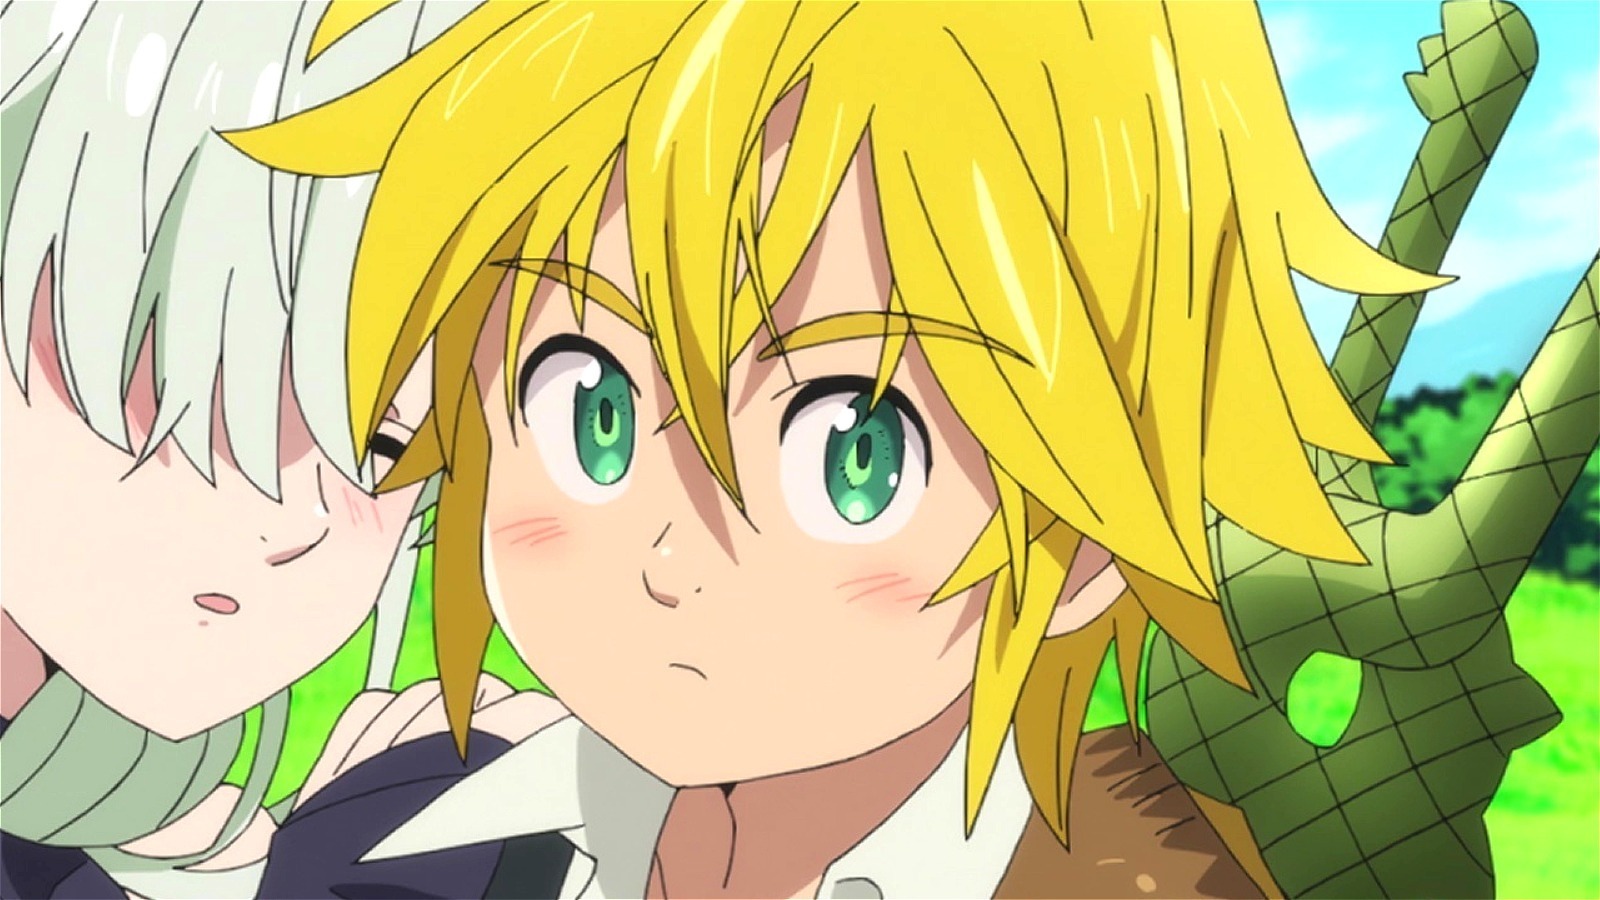 Meliodas of the seven deadly sins in anger mode | Seven deadly sins anime,  Demon king anime, Anime art